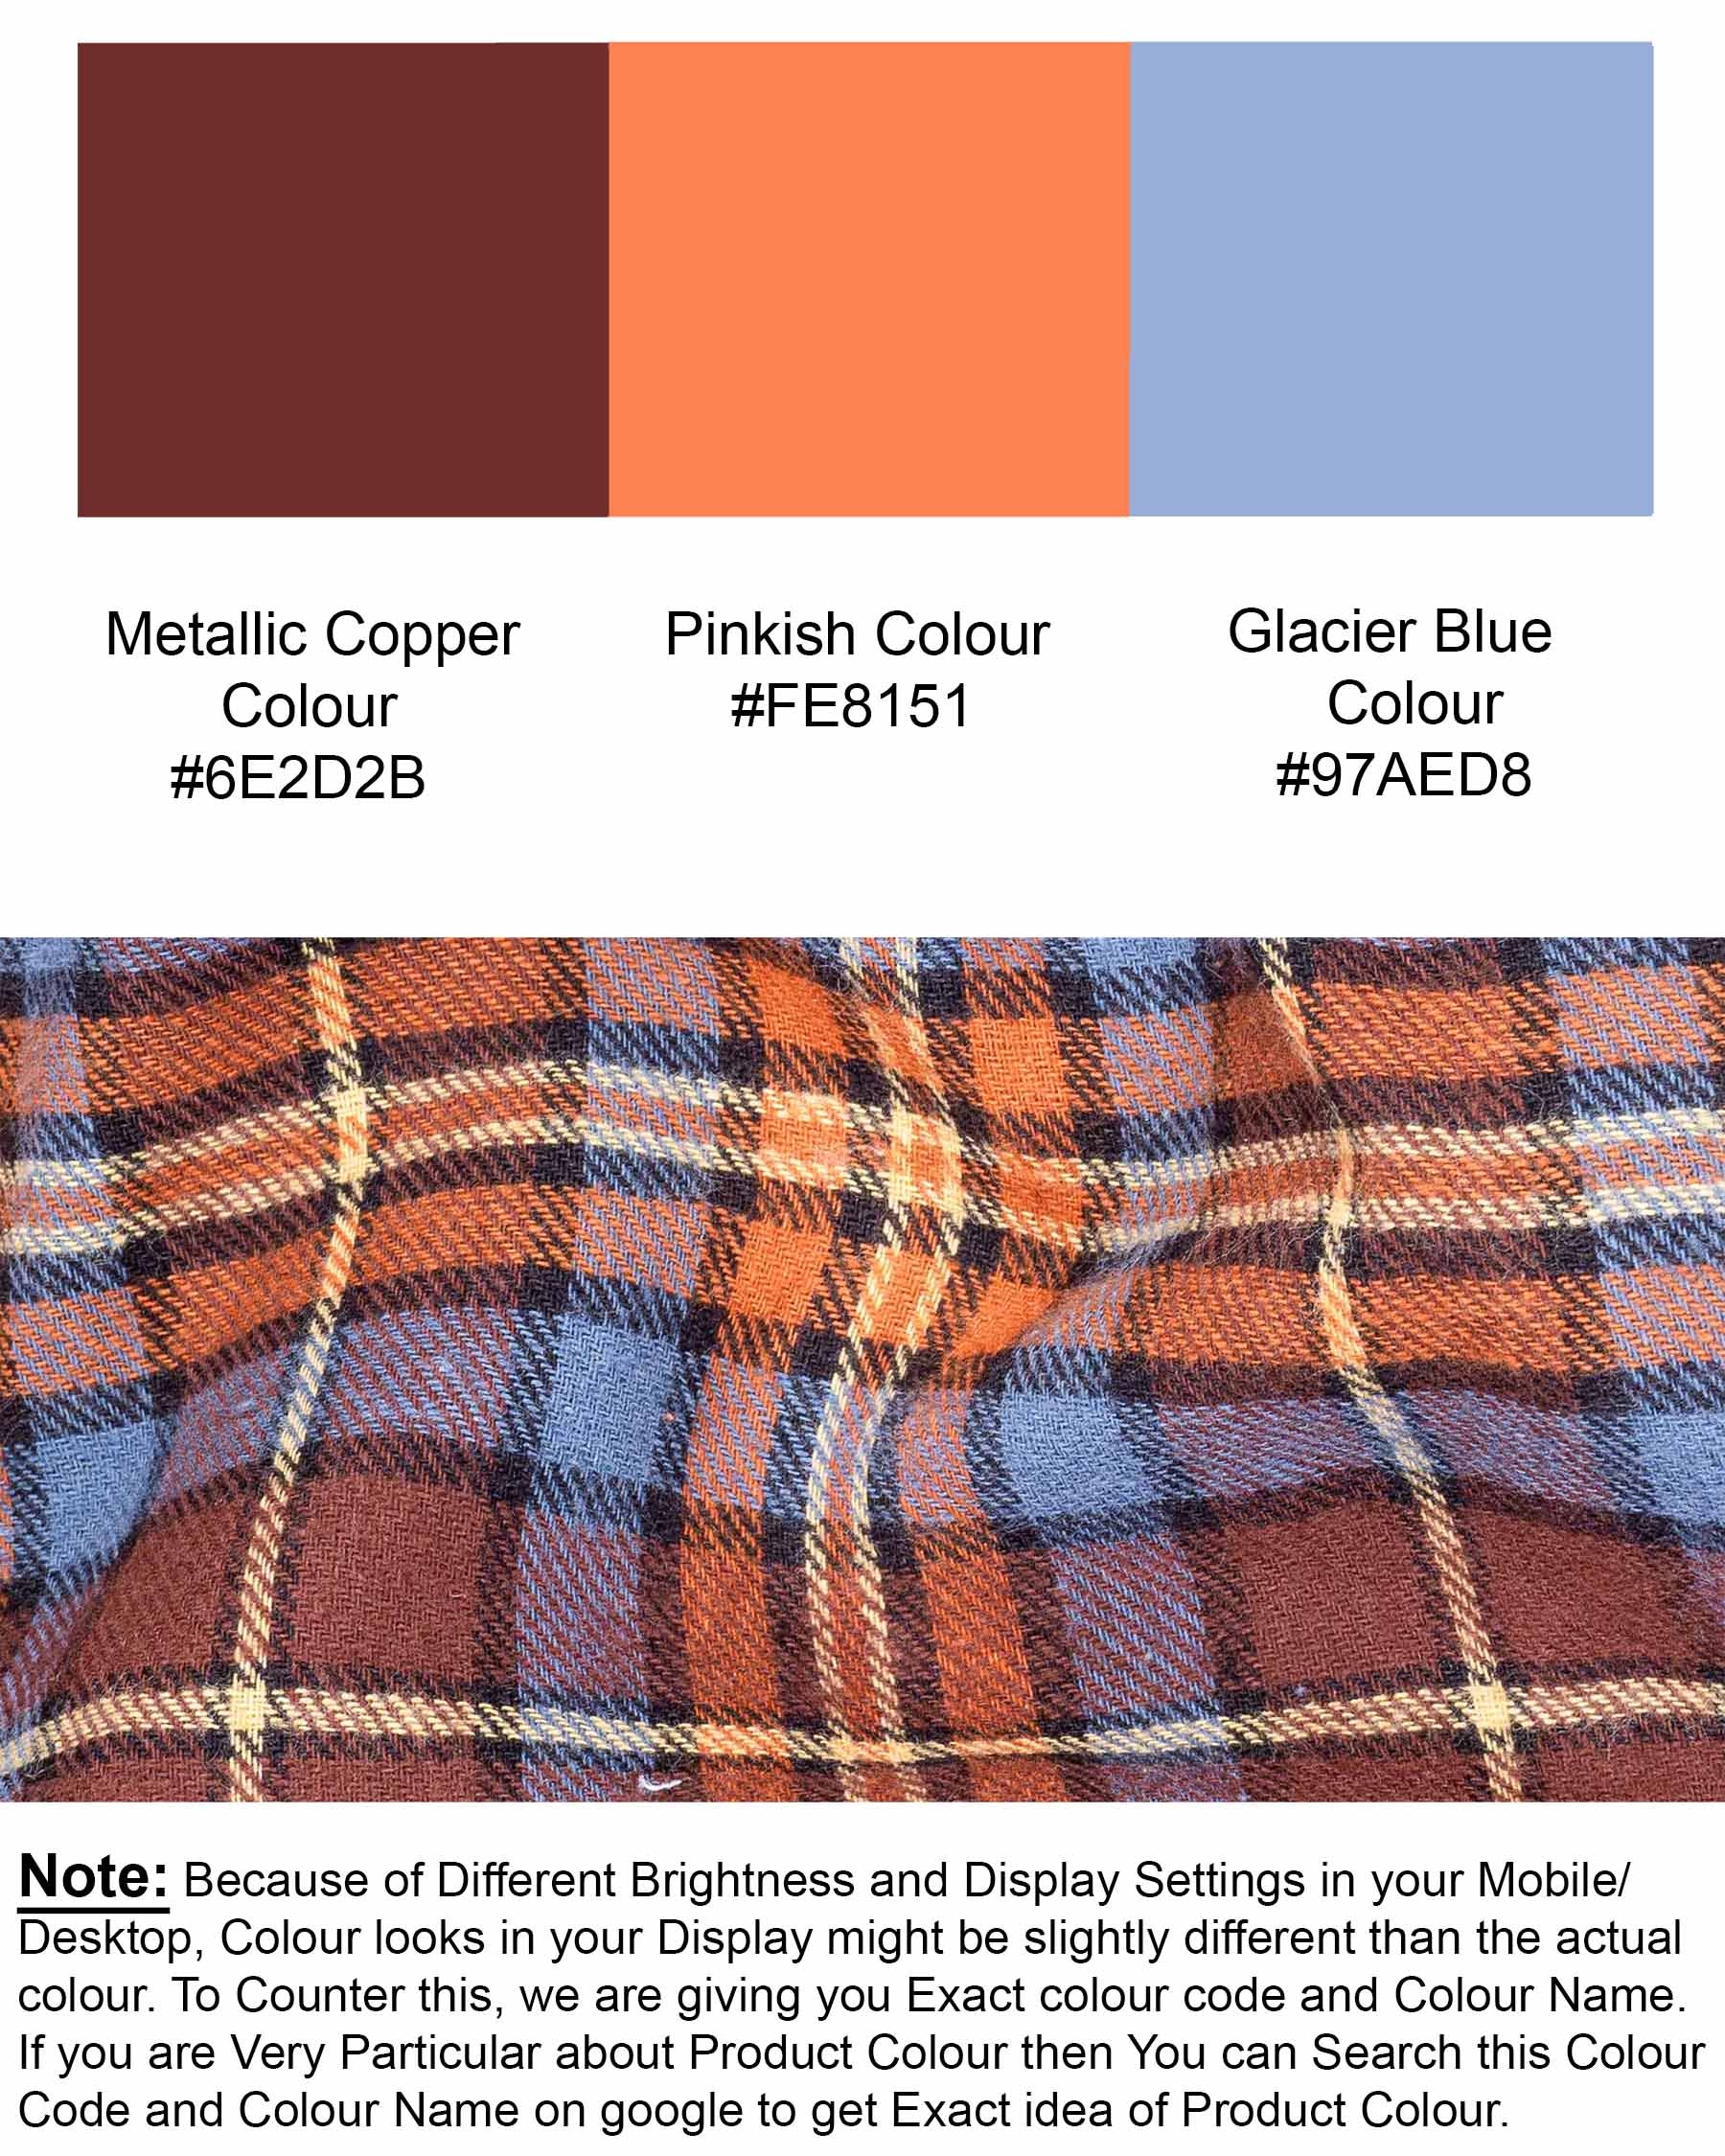 Metallic Copper with Pinkish Plaid Flannel Shirt 6969-BD-38,6969-BD-38,6969-BD-39,6969-BD-39,6969-BD-40,6969-BD-40,6969-BD-42,6969-BD-42,6969-BD-44,6969-BD-44,6969-BD-46,6969-BD-46,6969-BD-48,6969-BD-48,6969-BD-50,6969-BD-50,6969-BD-52,6969-BD-52